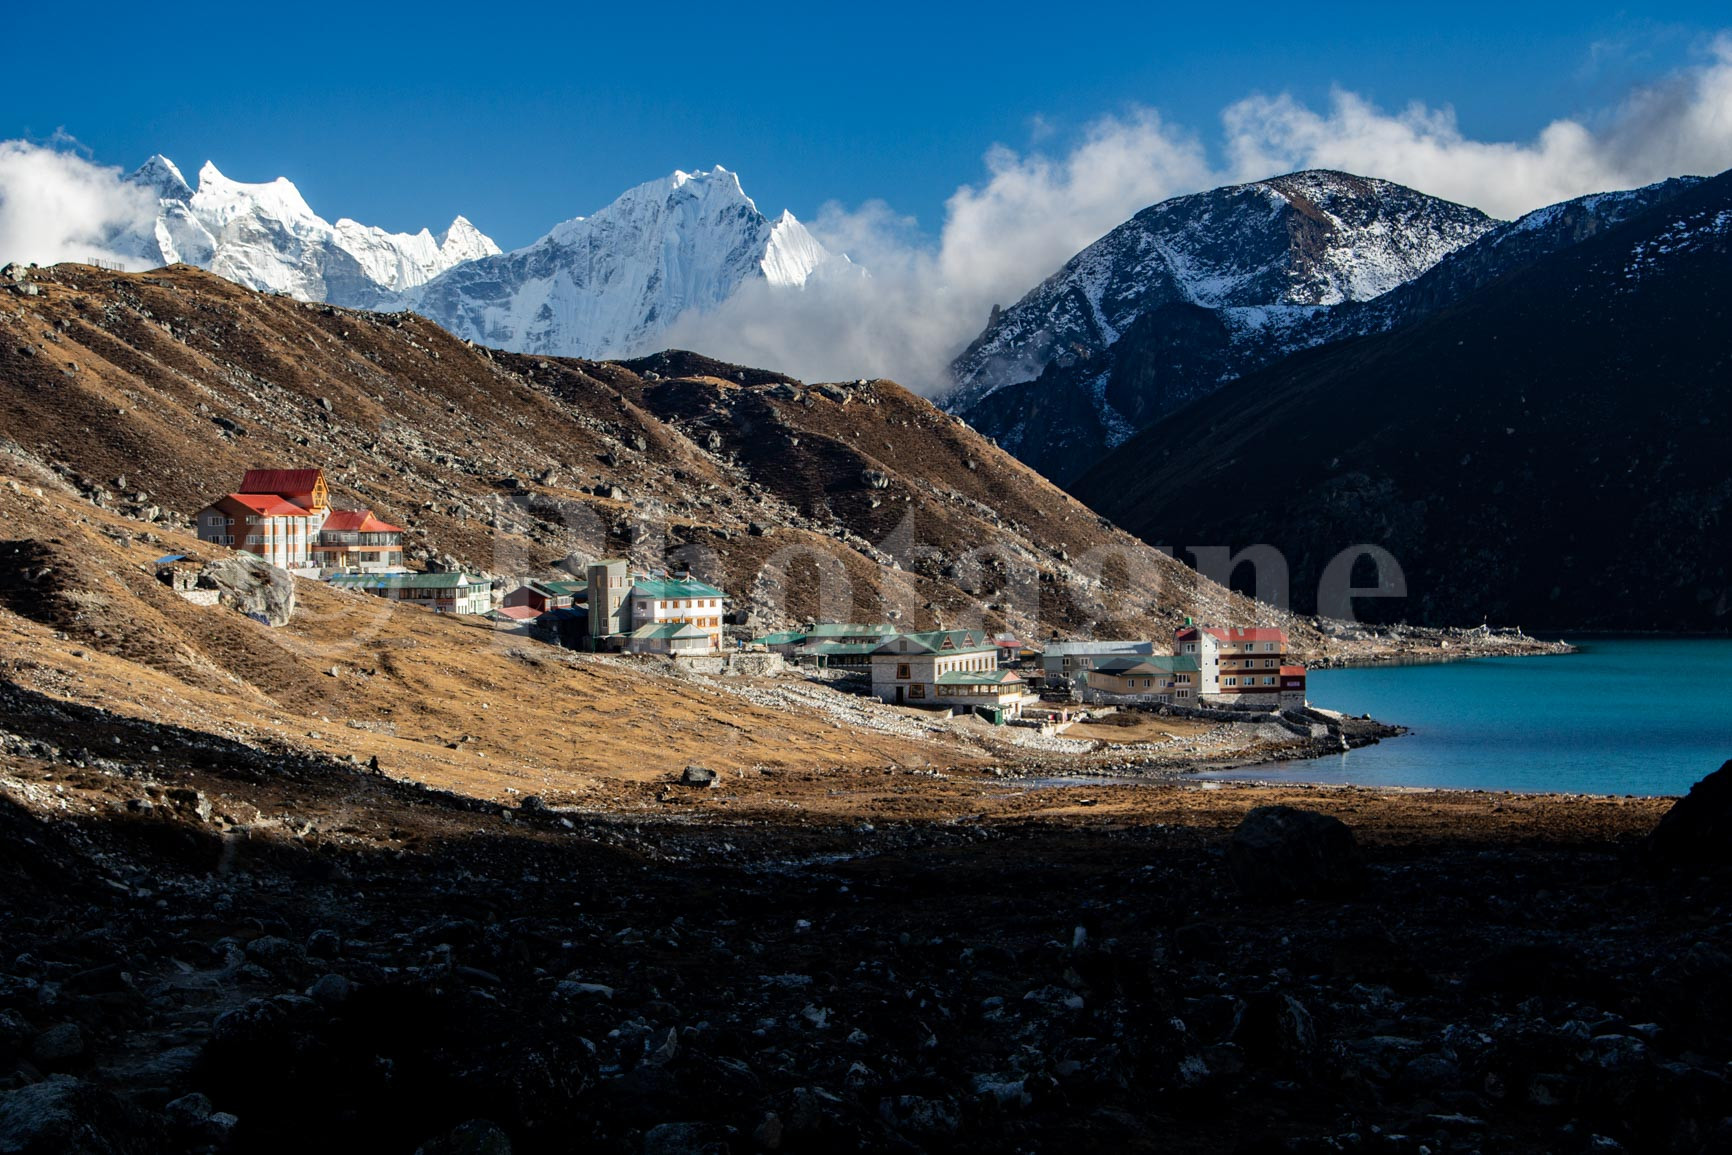 Gokyo in the evening, on the trek of the three passes